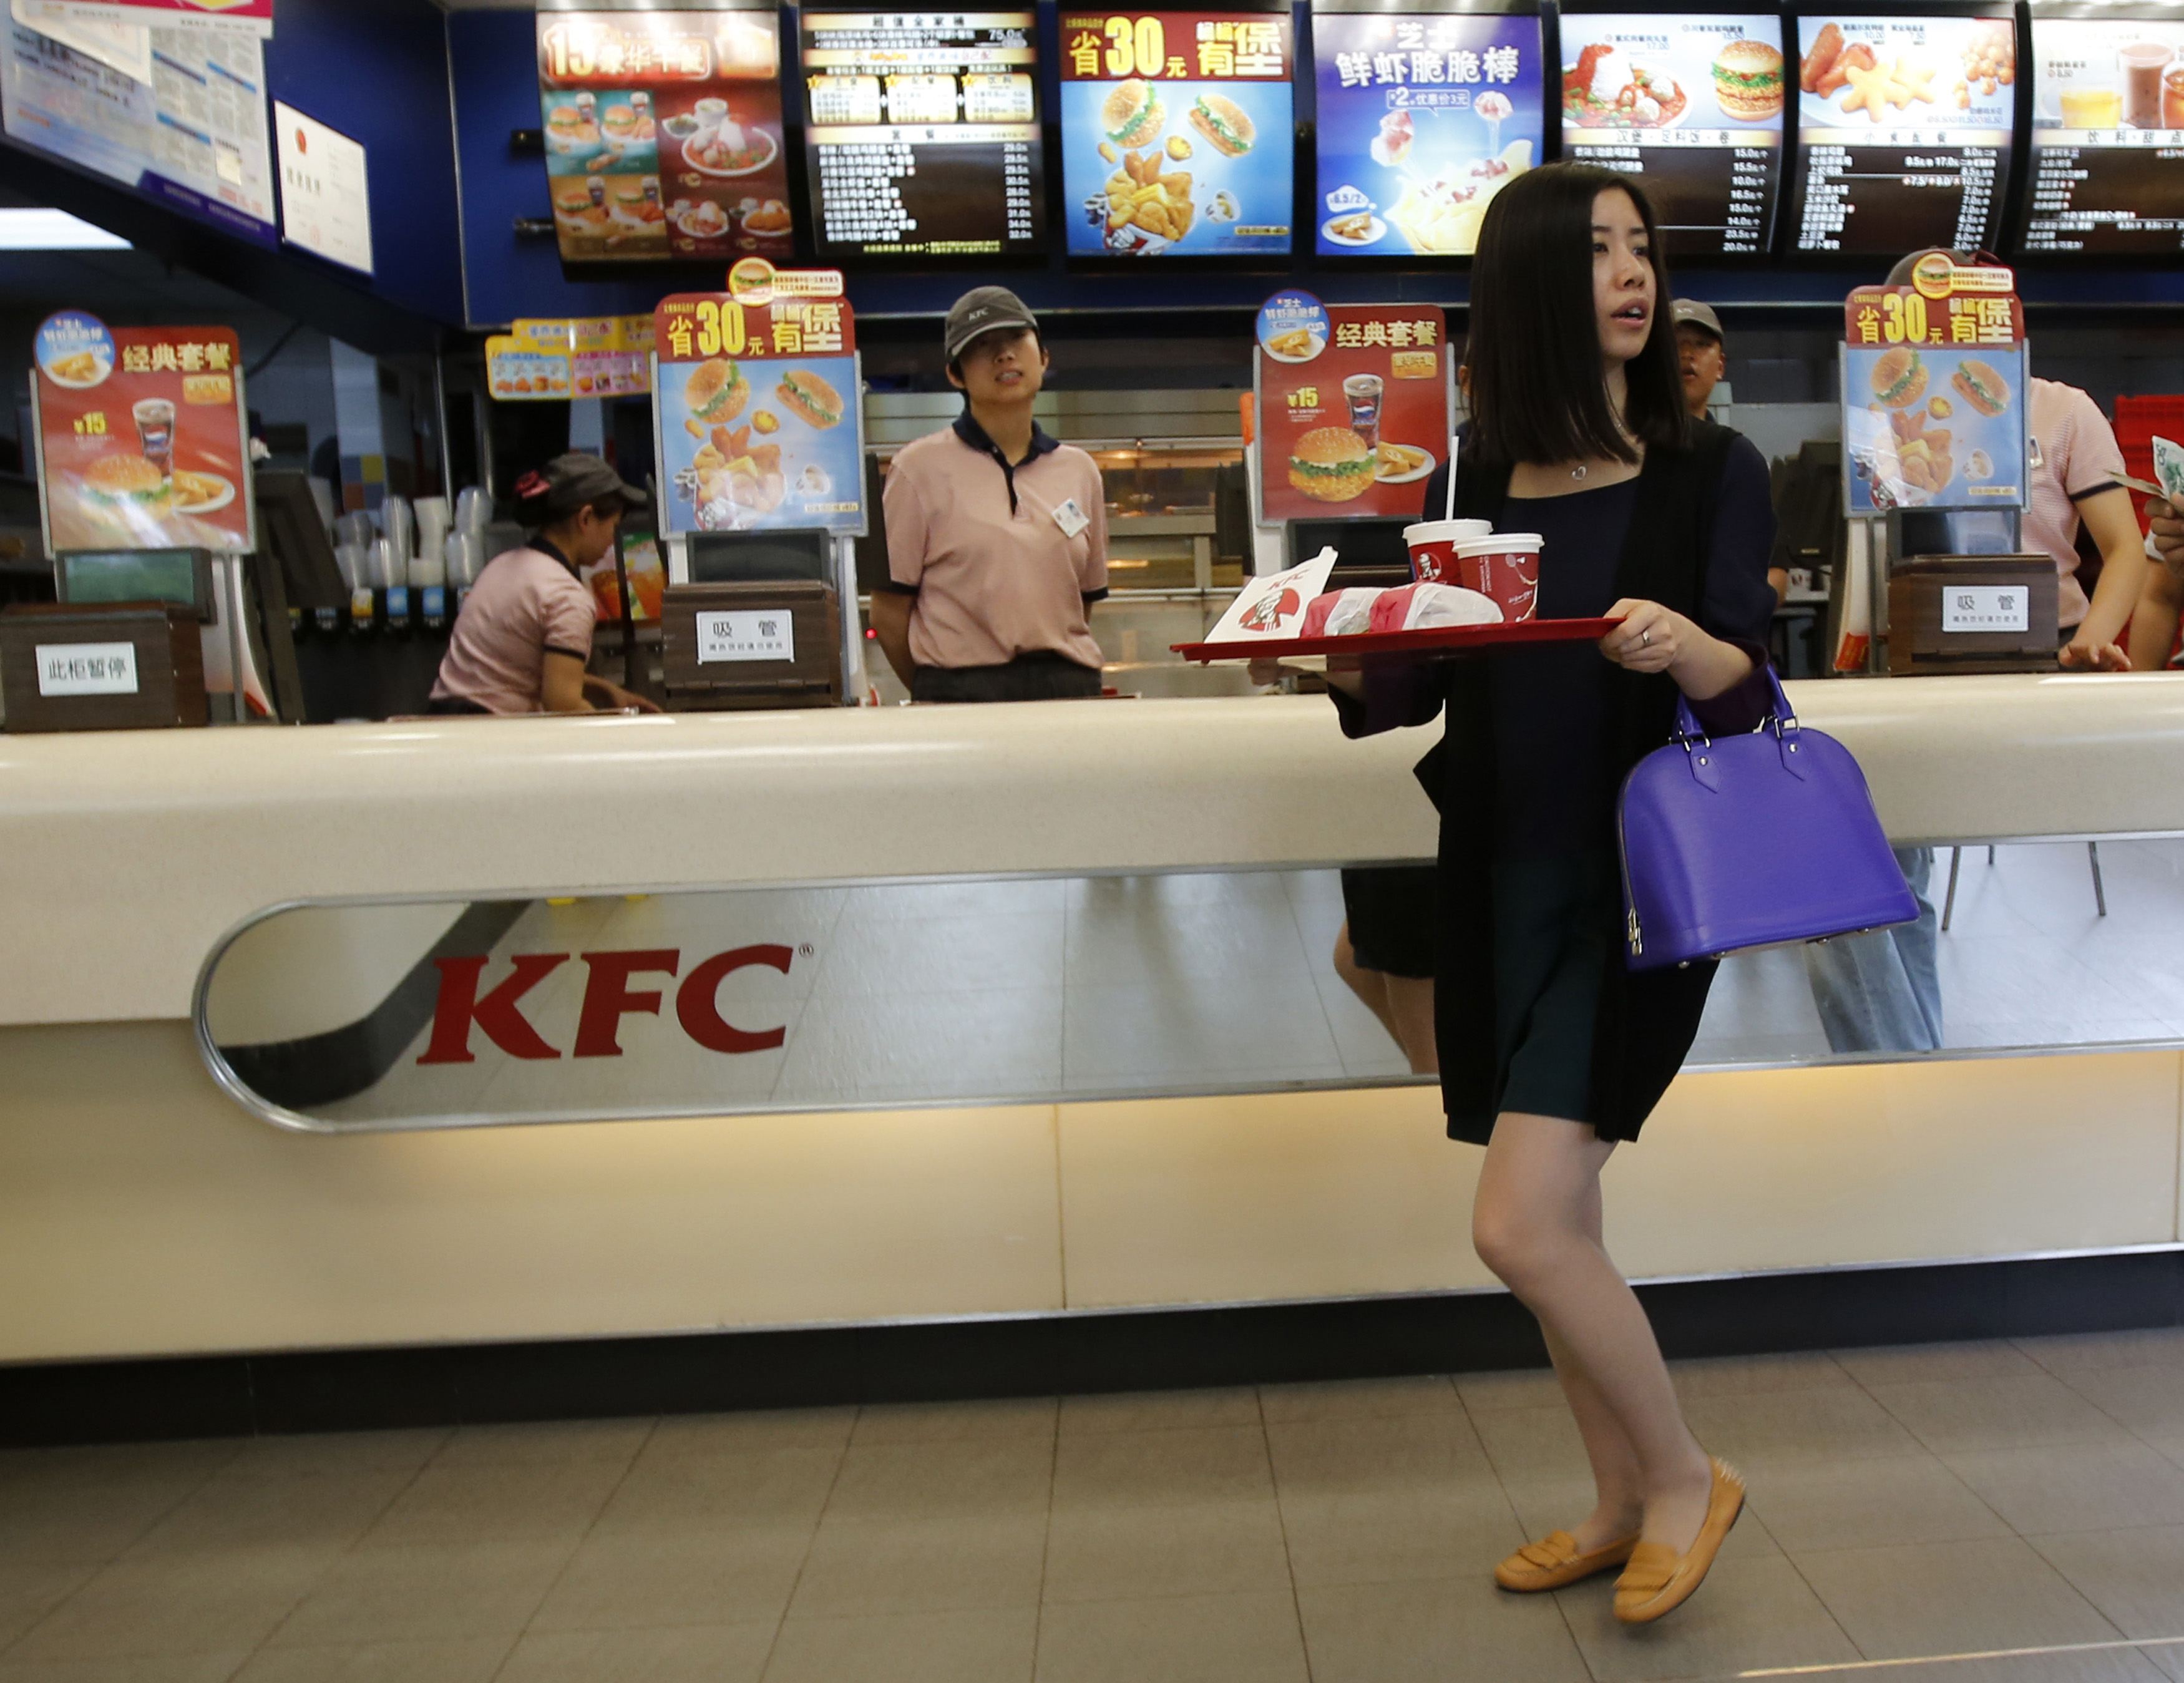 KFC’s parent, Yum Brands, gets nearly 51 per cent of revenue from China, highlighting US companies’ exposure to any slowdown on the mainland. Photo: Reuters